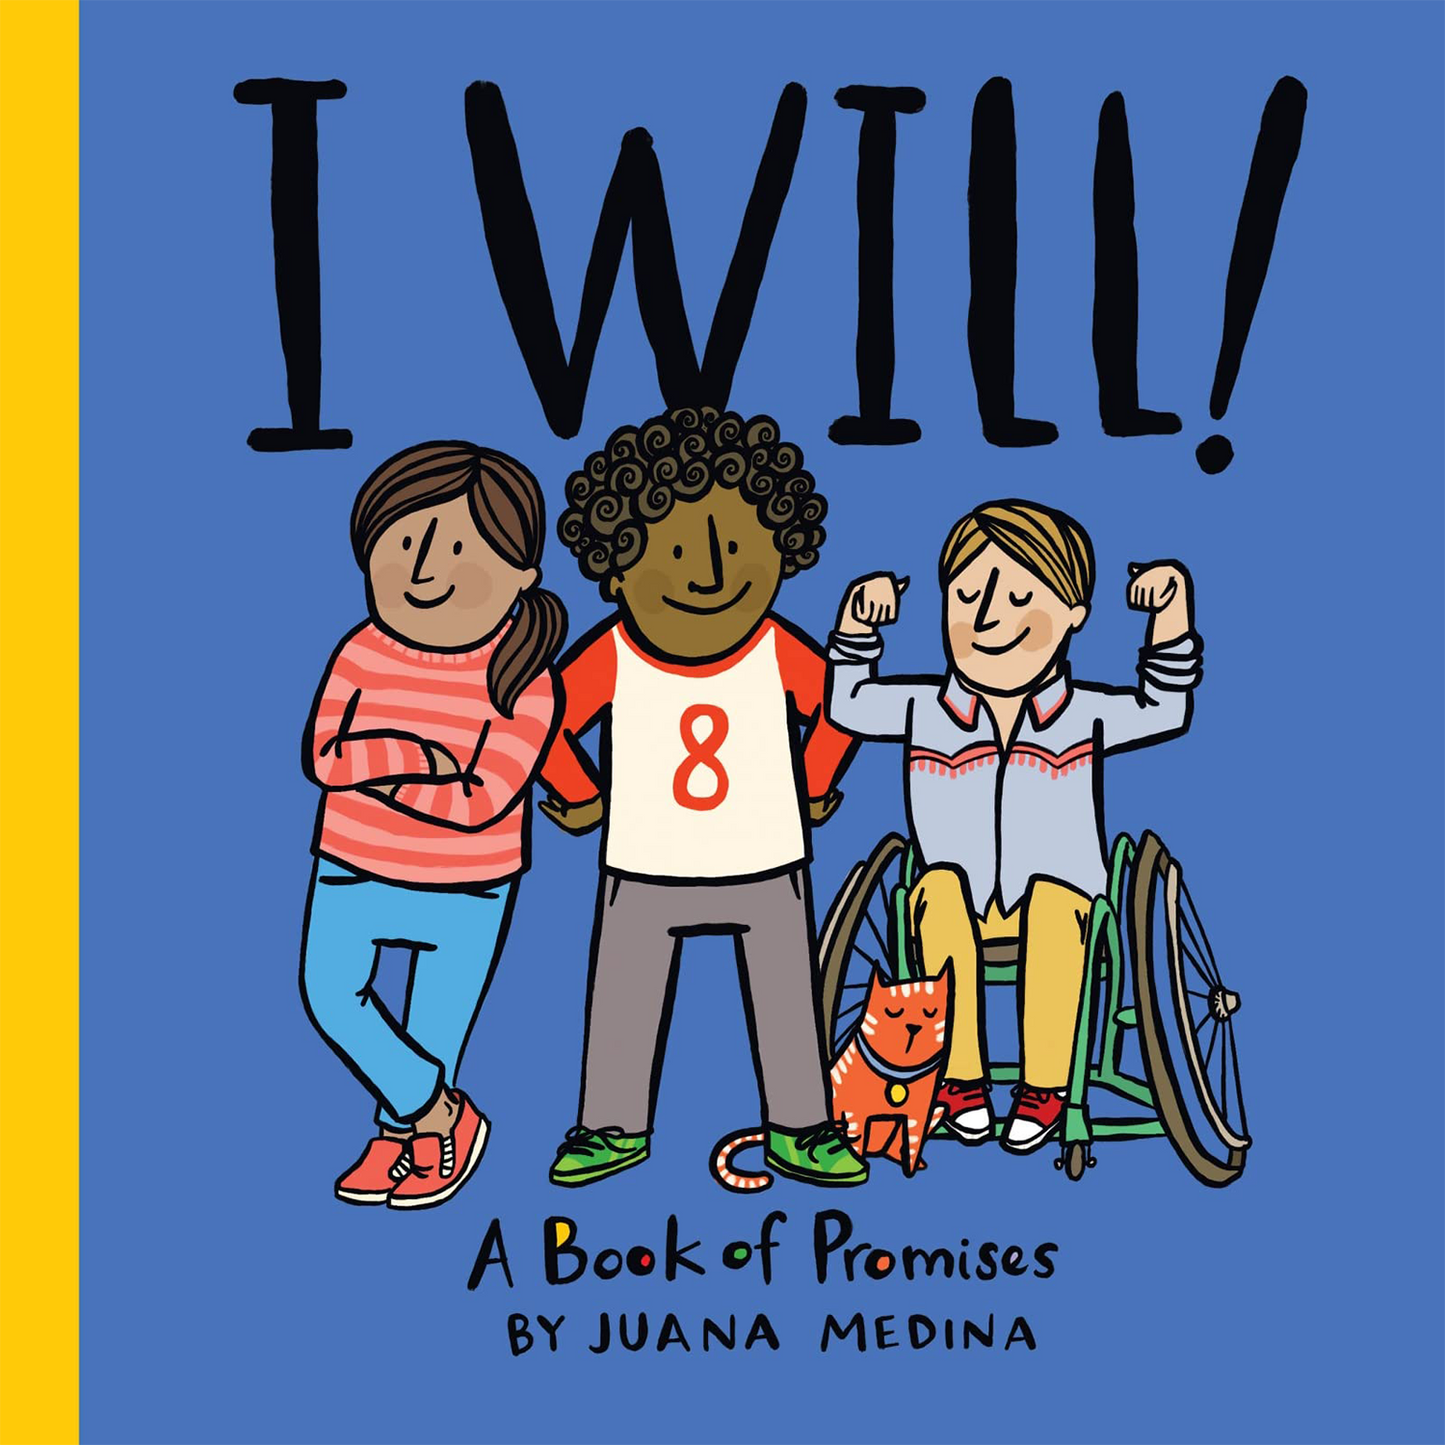 I Will!: A Book of Promises (An I WILL! Book)